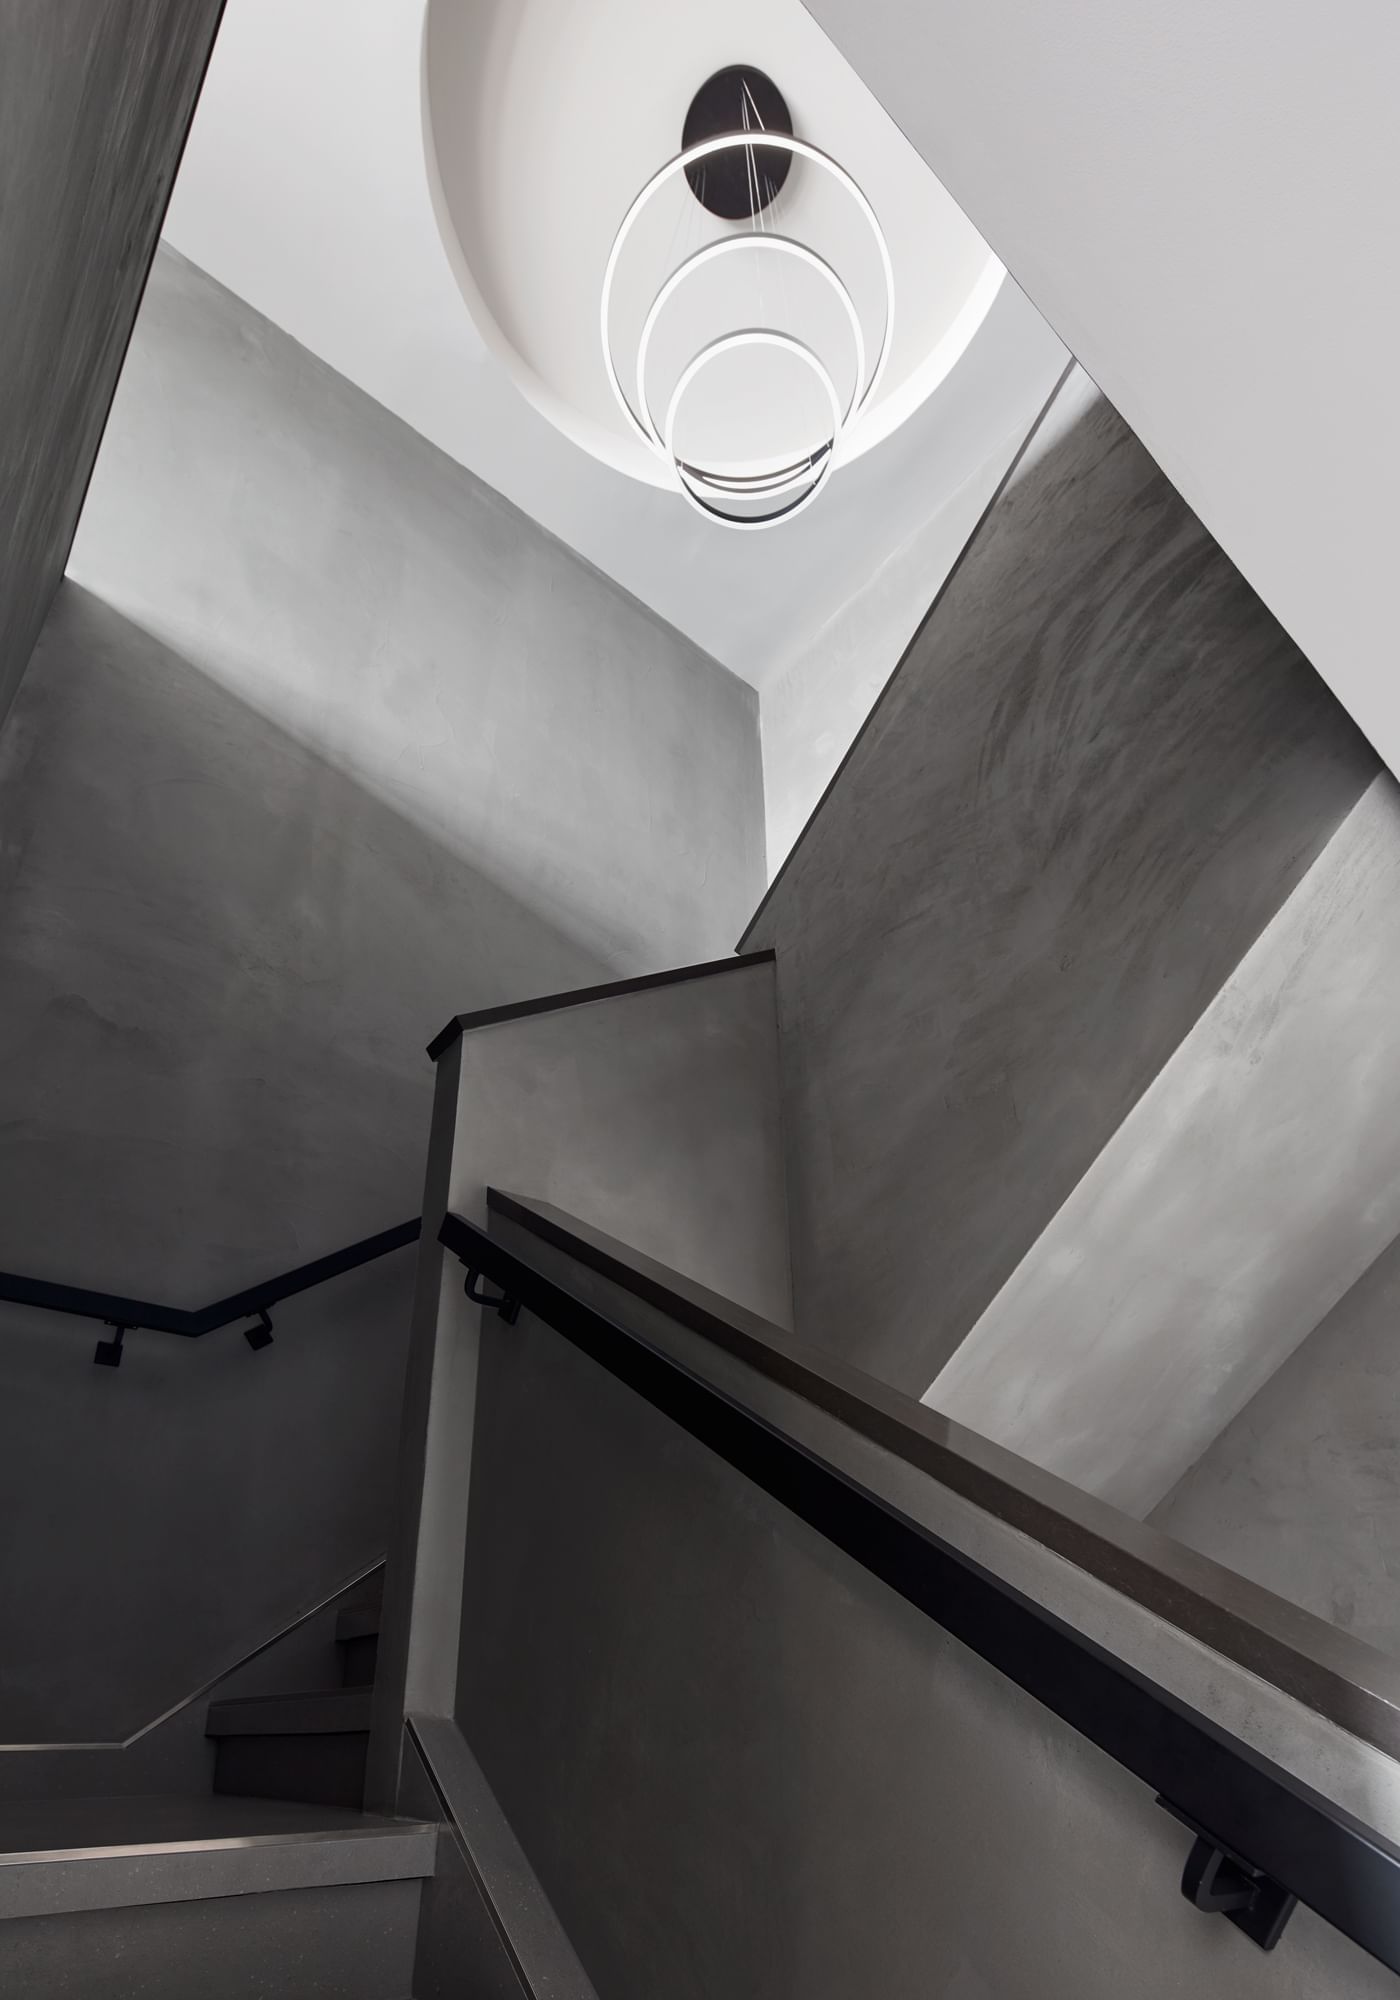 Poliform Penthouse Staircase at Gansevoort Meatpacking NYC